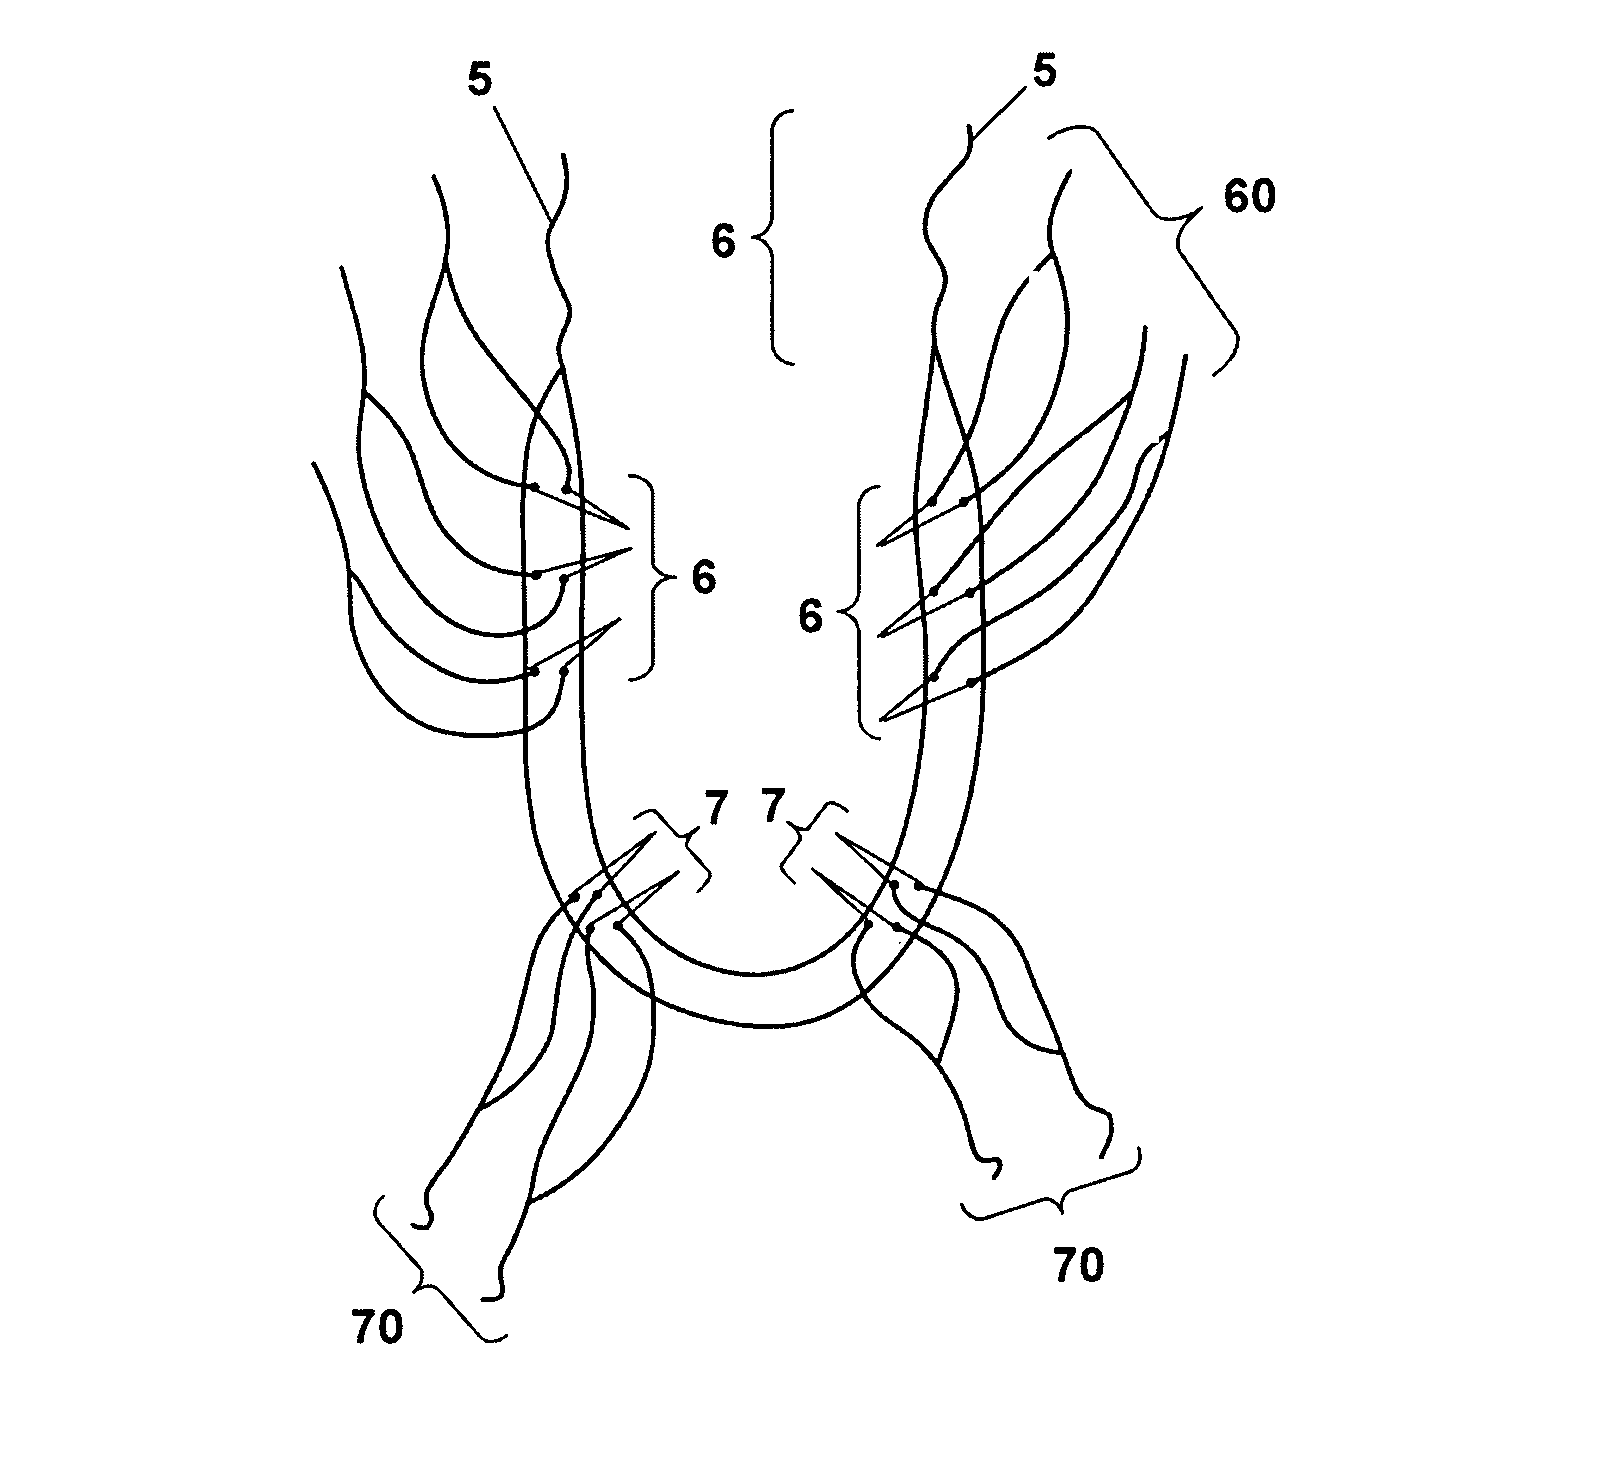 System for the treatment of stress urinary incontinence